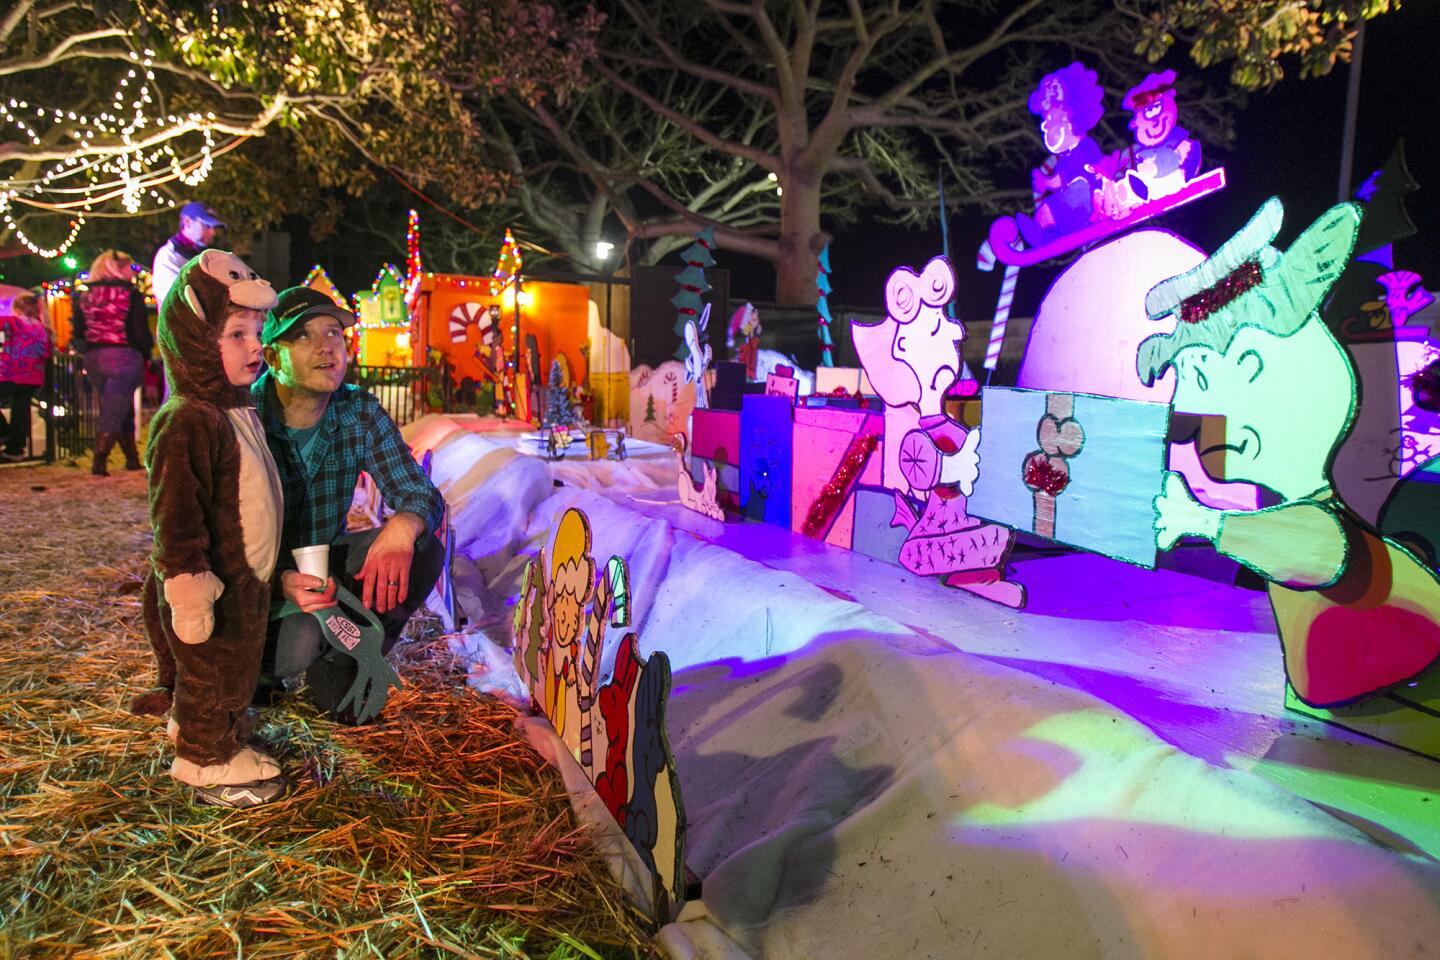 Josh Peevyhouse and his son Jamin, 3, look at part of the display during the official opening of the Snoopy House at Costa Mesa City Hall on Saturday, December 13.